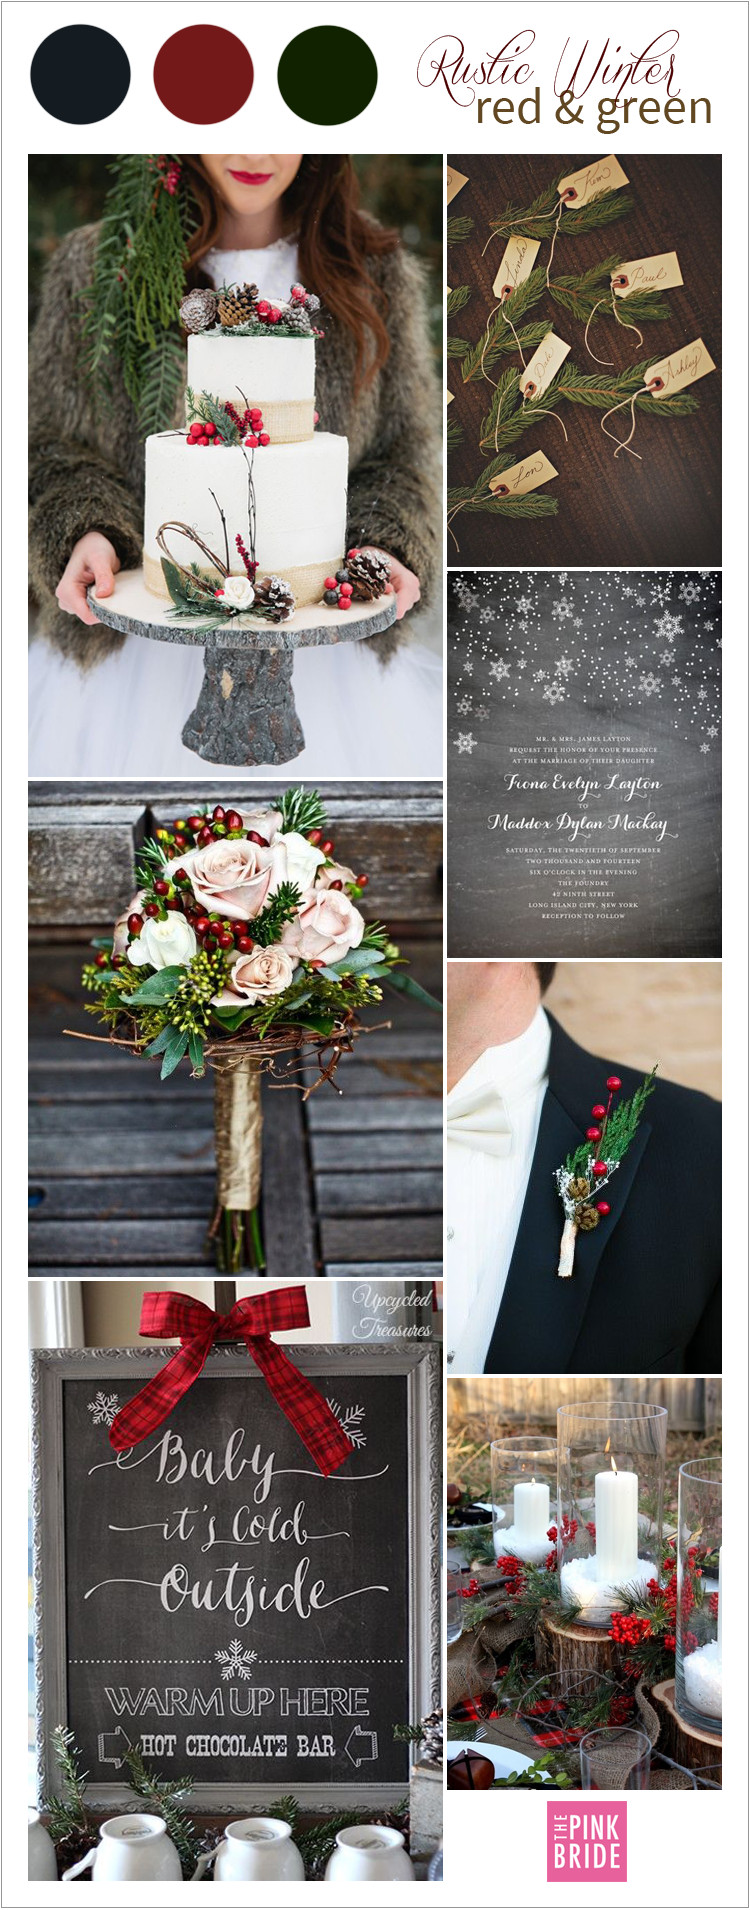 December Wedding Colors
 Wedding Color Board Rustic Winter Red & Green The Pink